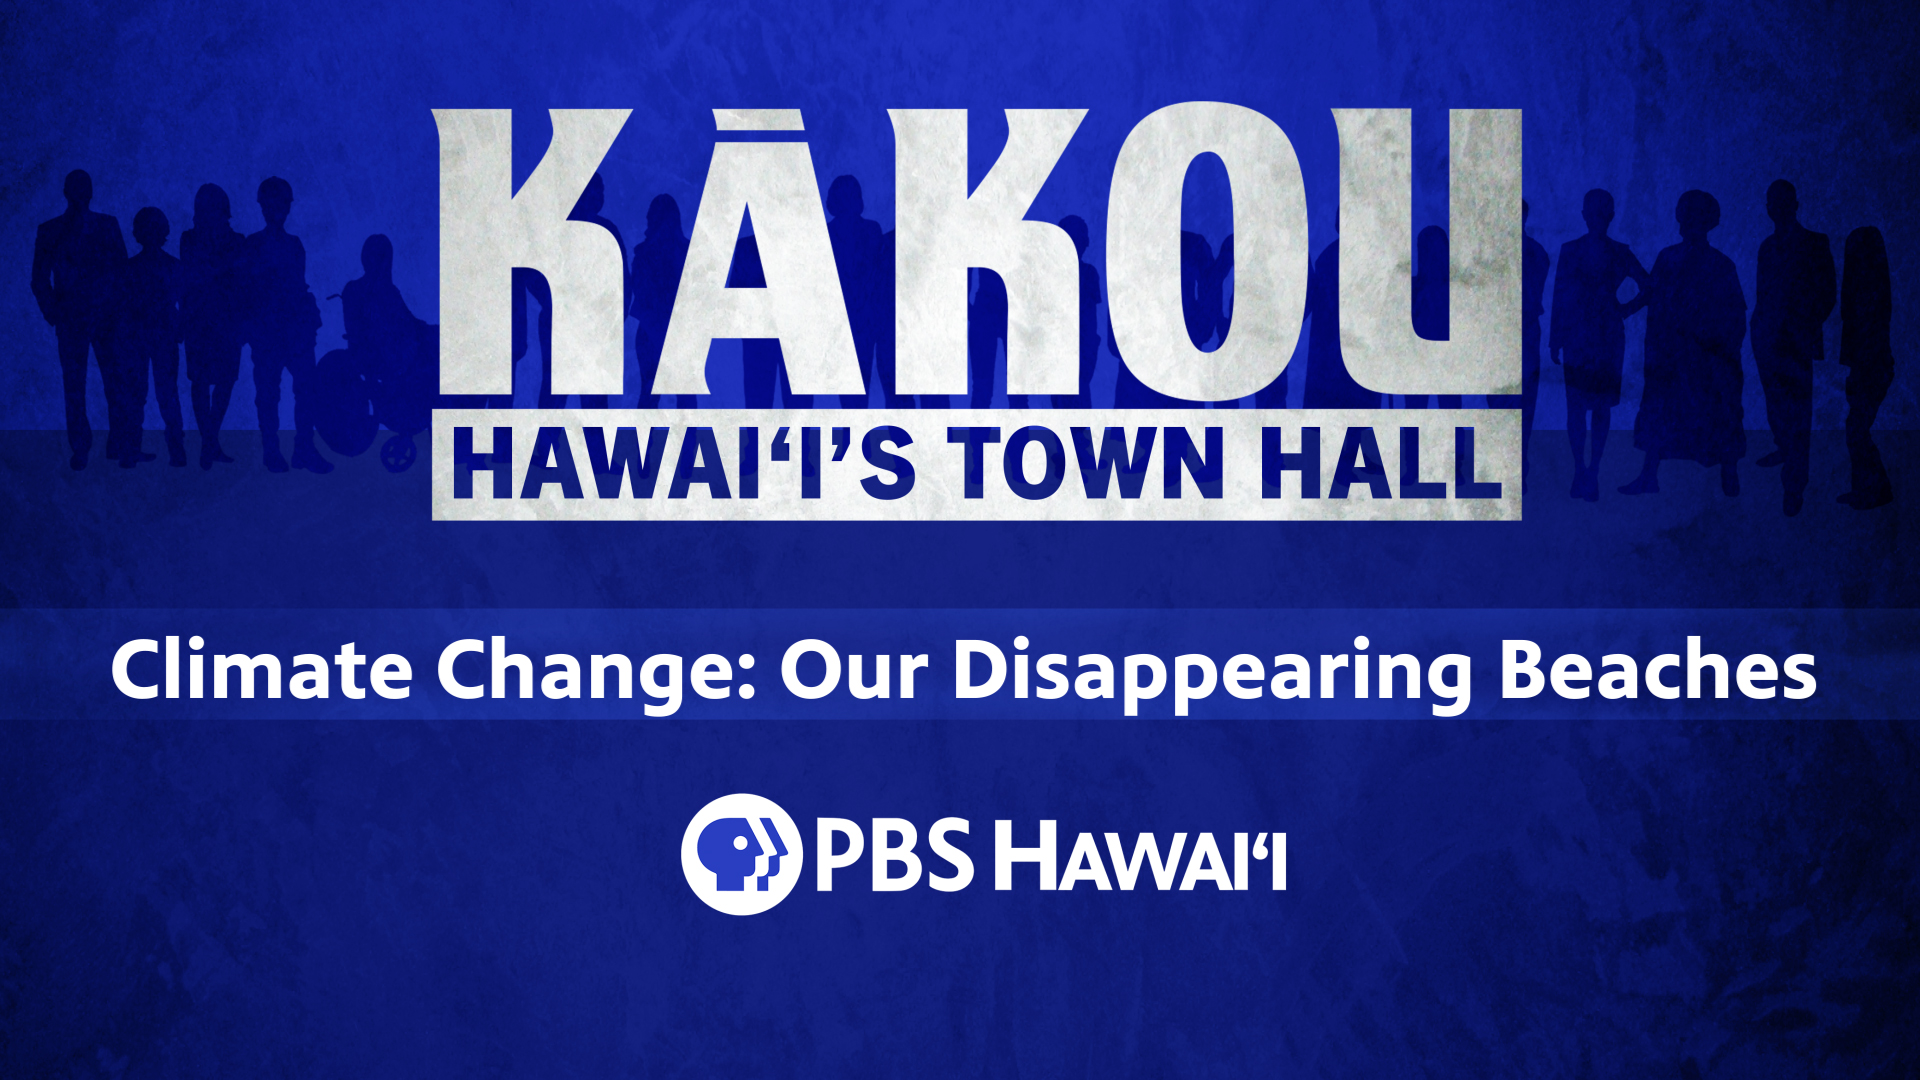 KĀKOU: Hawaiʻi’s Town Hall <br/> Climate Change: Our Disappearing Beaches